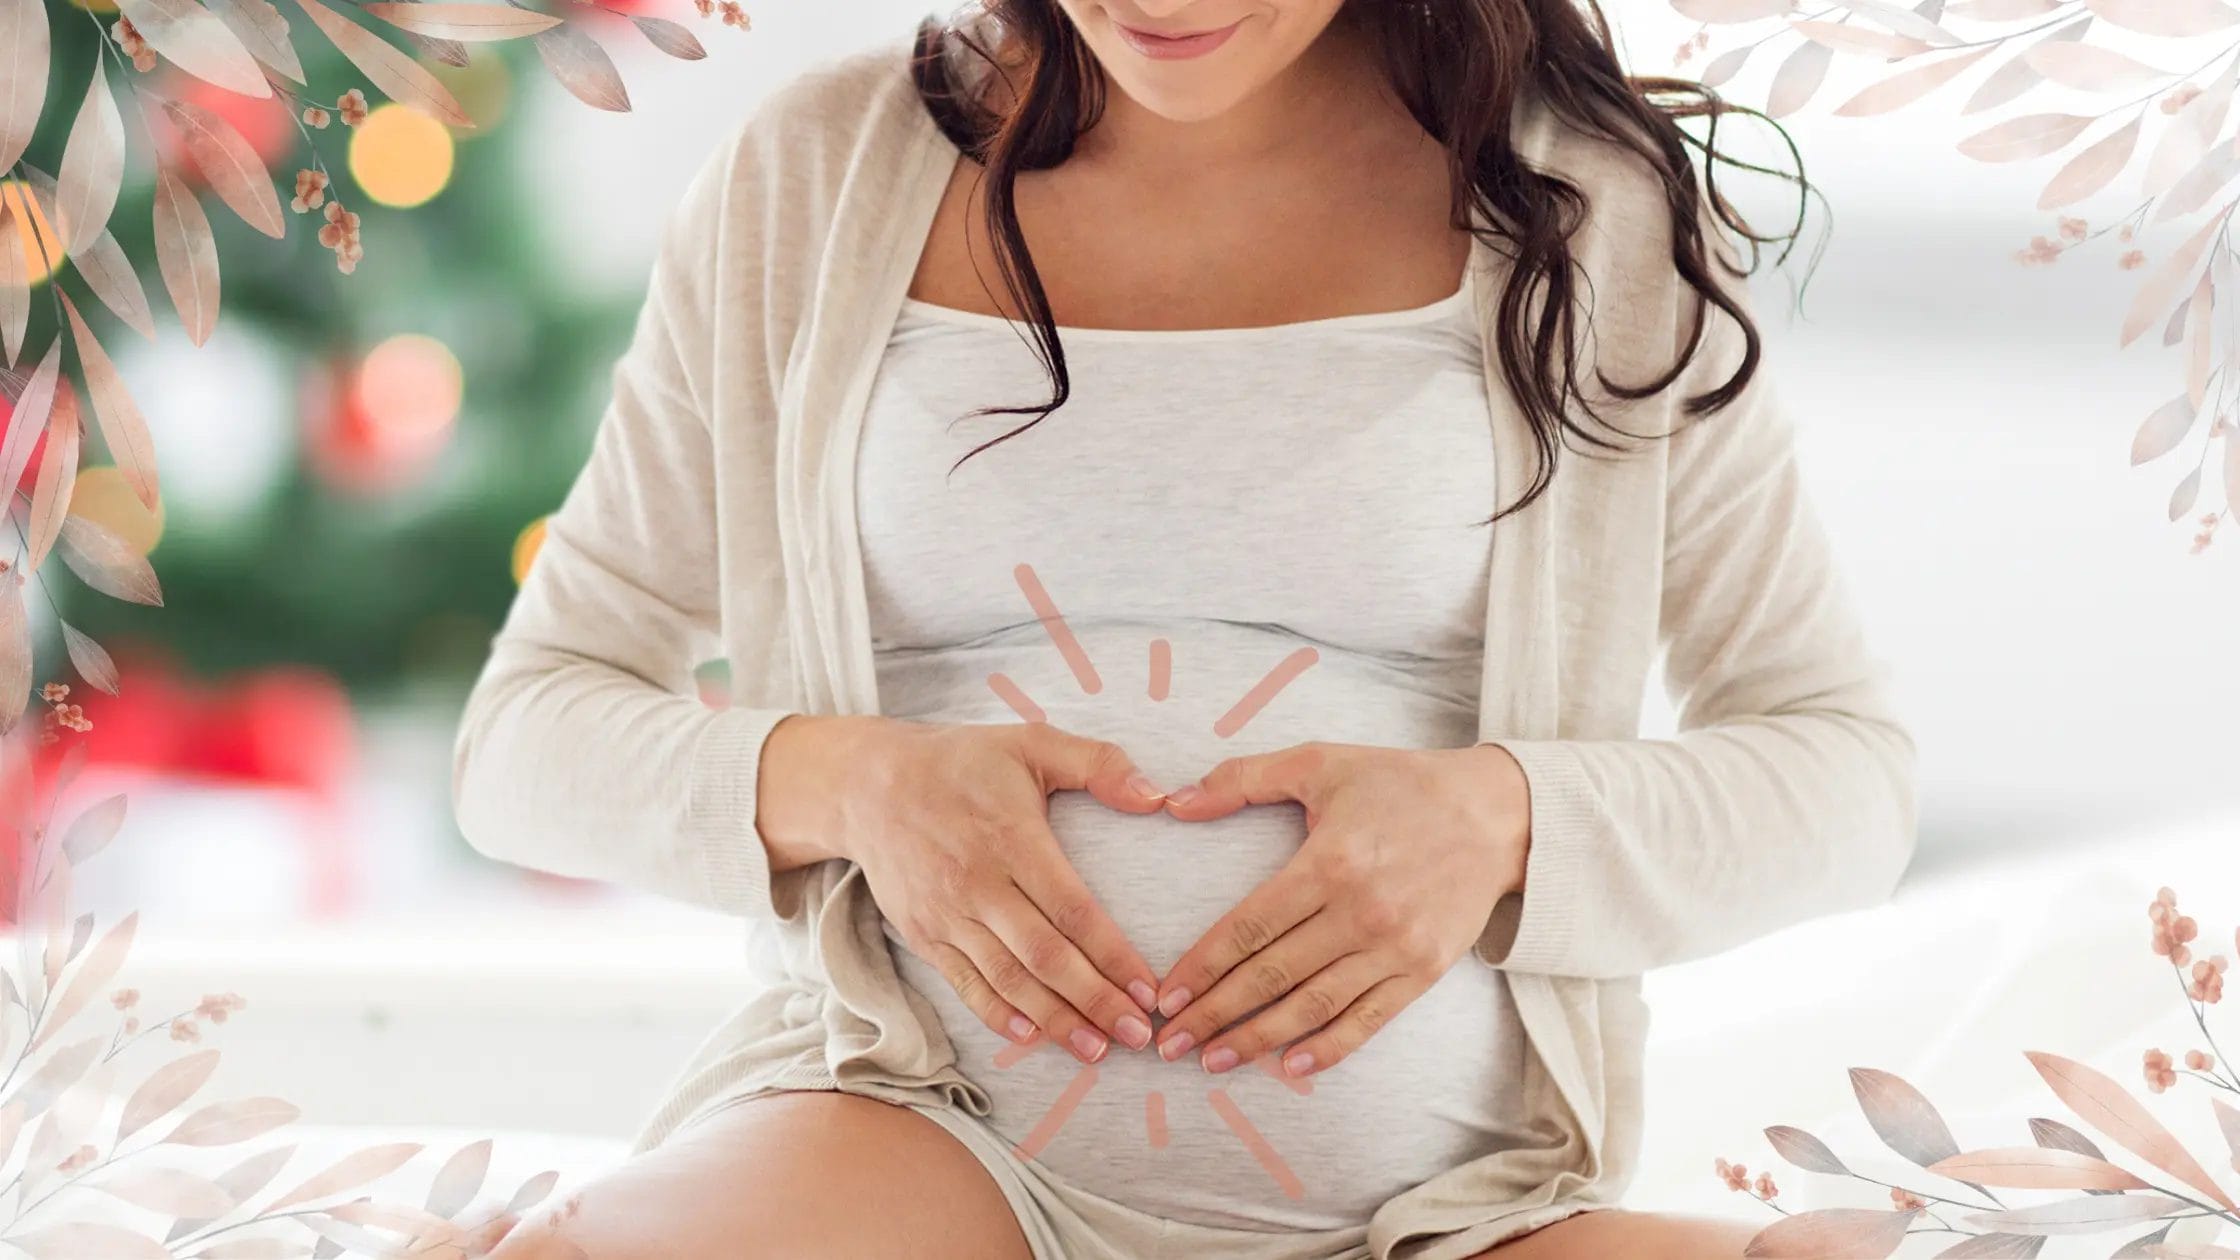 8 practical gifts for pregnant women they'll actually use